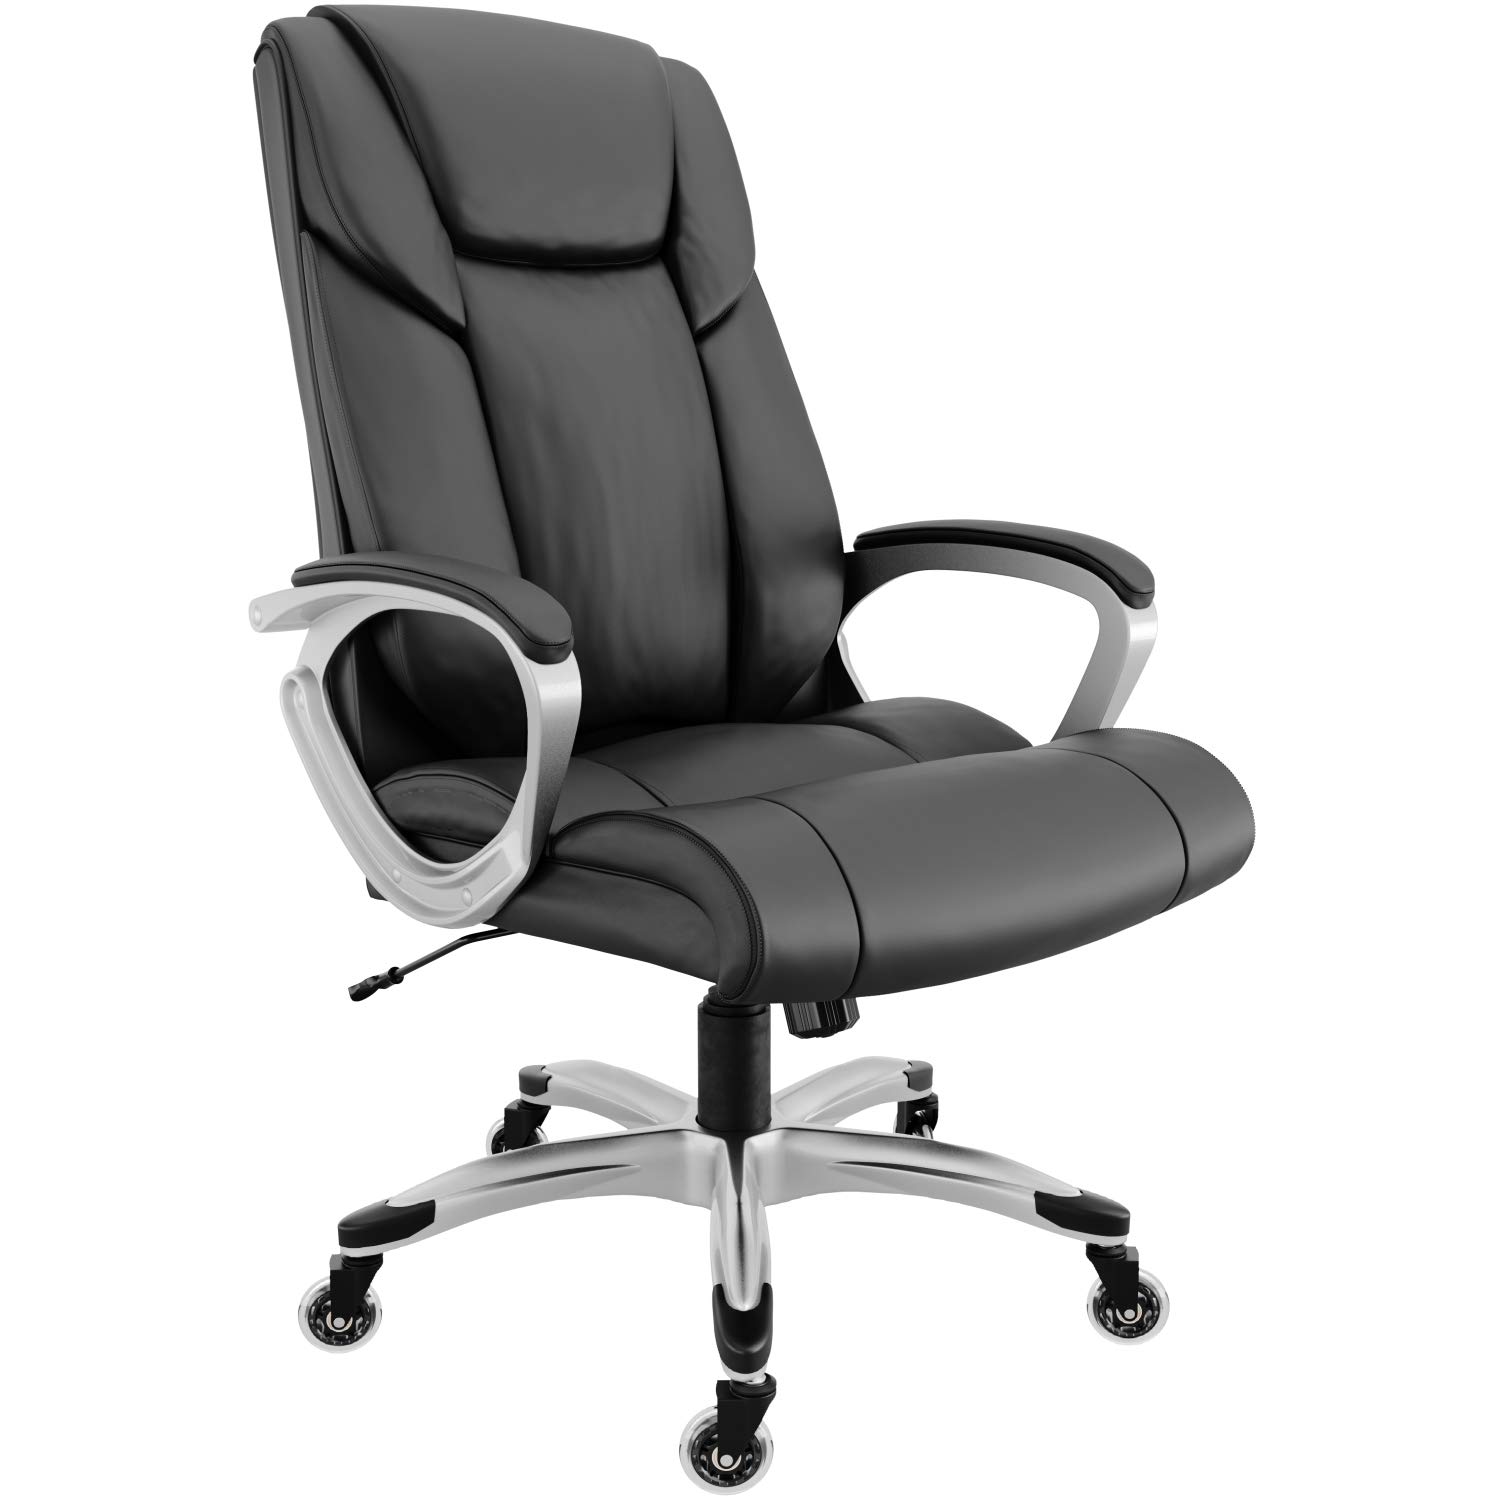  RIF6 Executive Chair with Superior Inline Skate Caster Wheels – Heavy Duty Office Chair with Premium Gas Lift – Comfortable High Back Bonded Leather Gaming Chair with Tilt and Seat Height Adjustment...